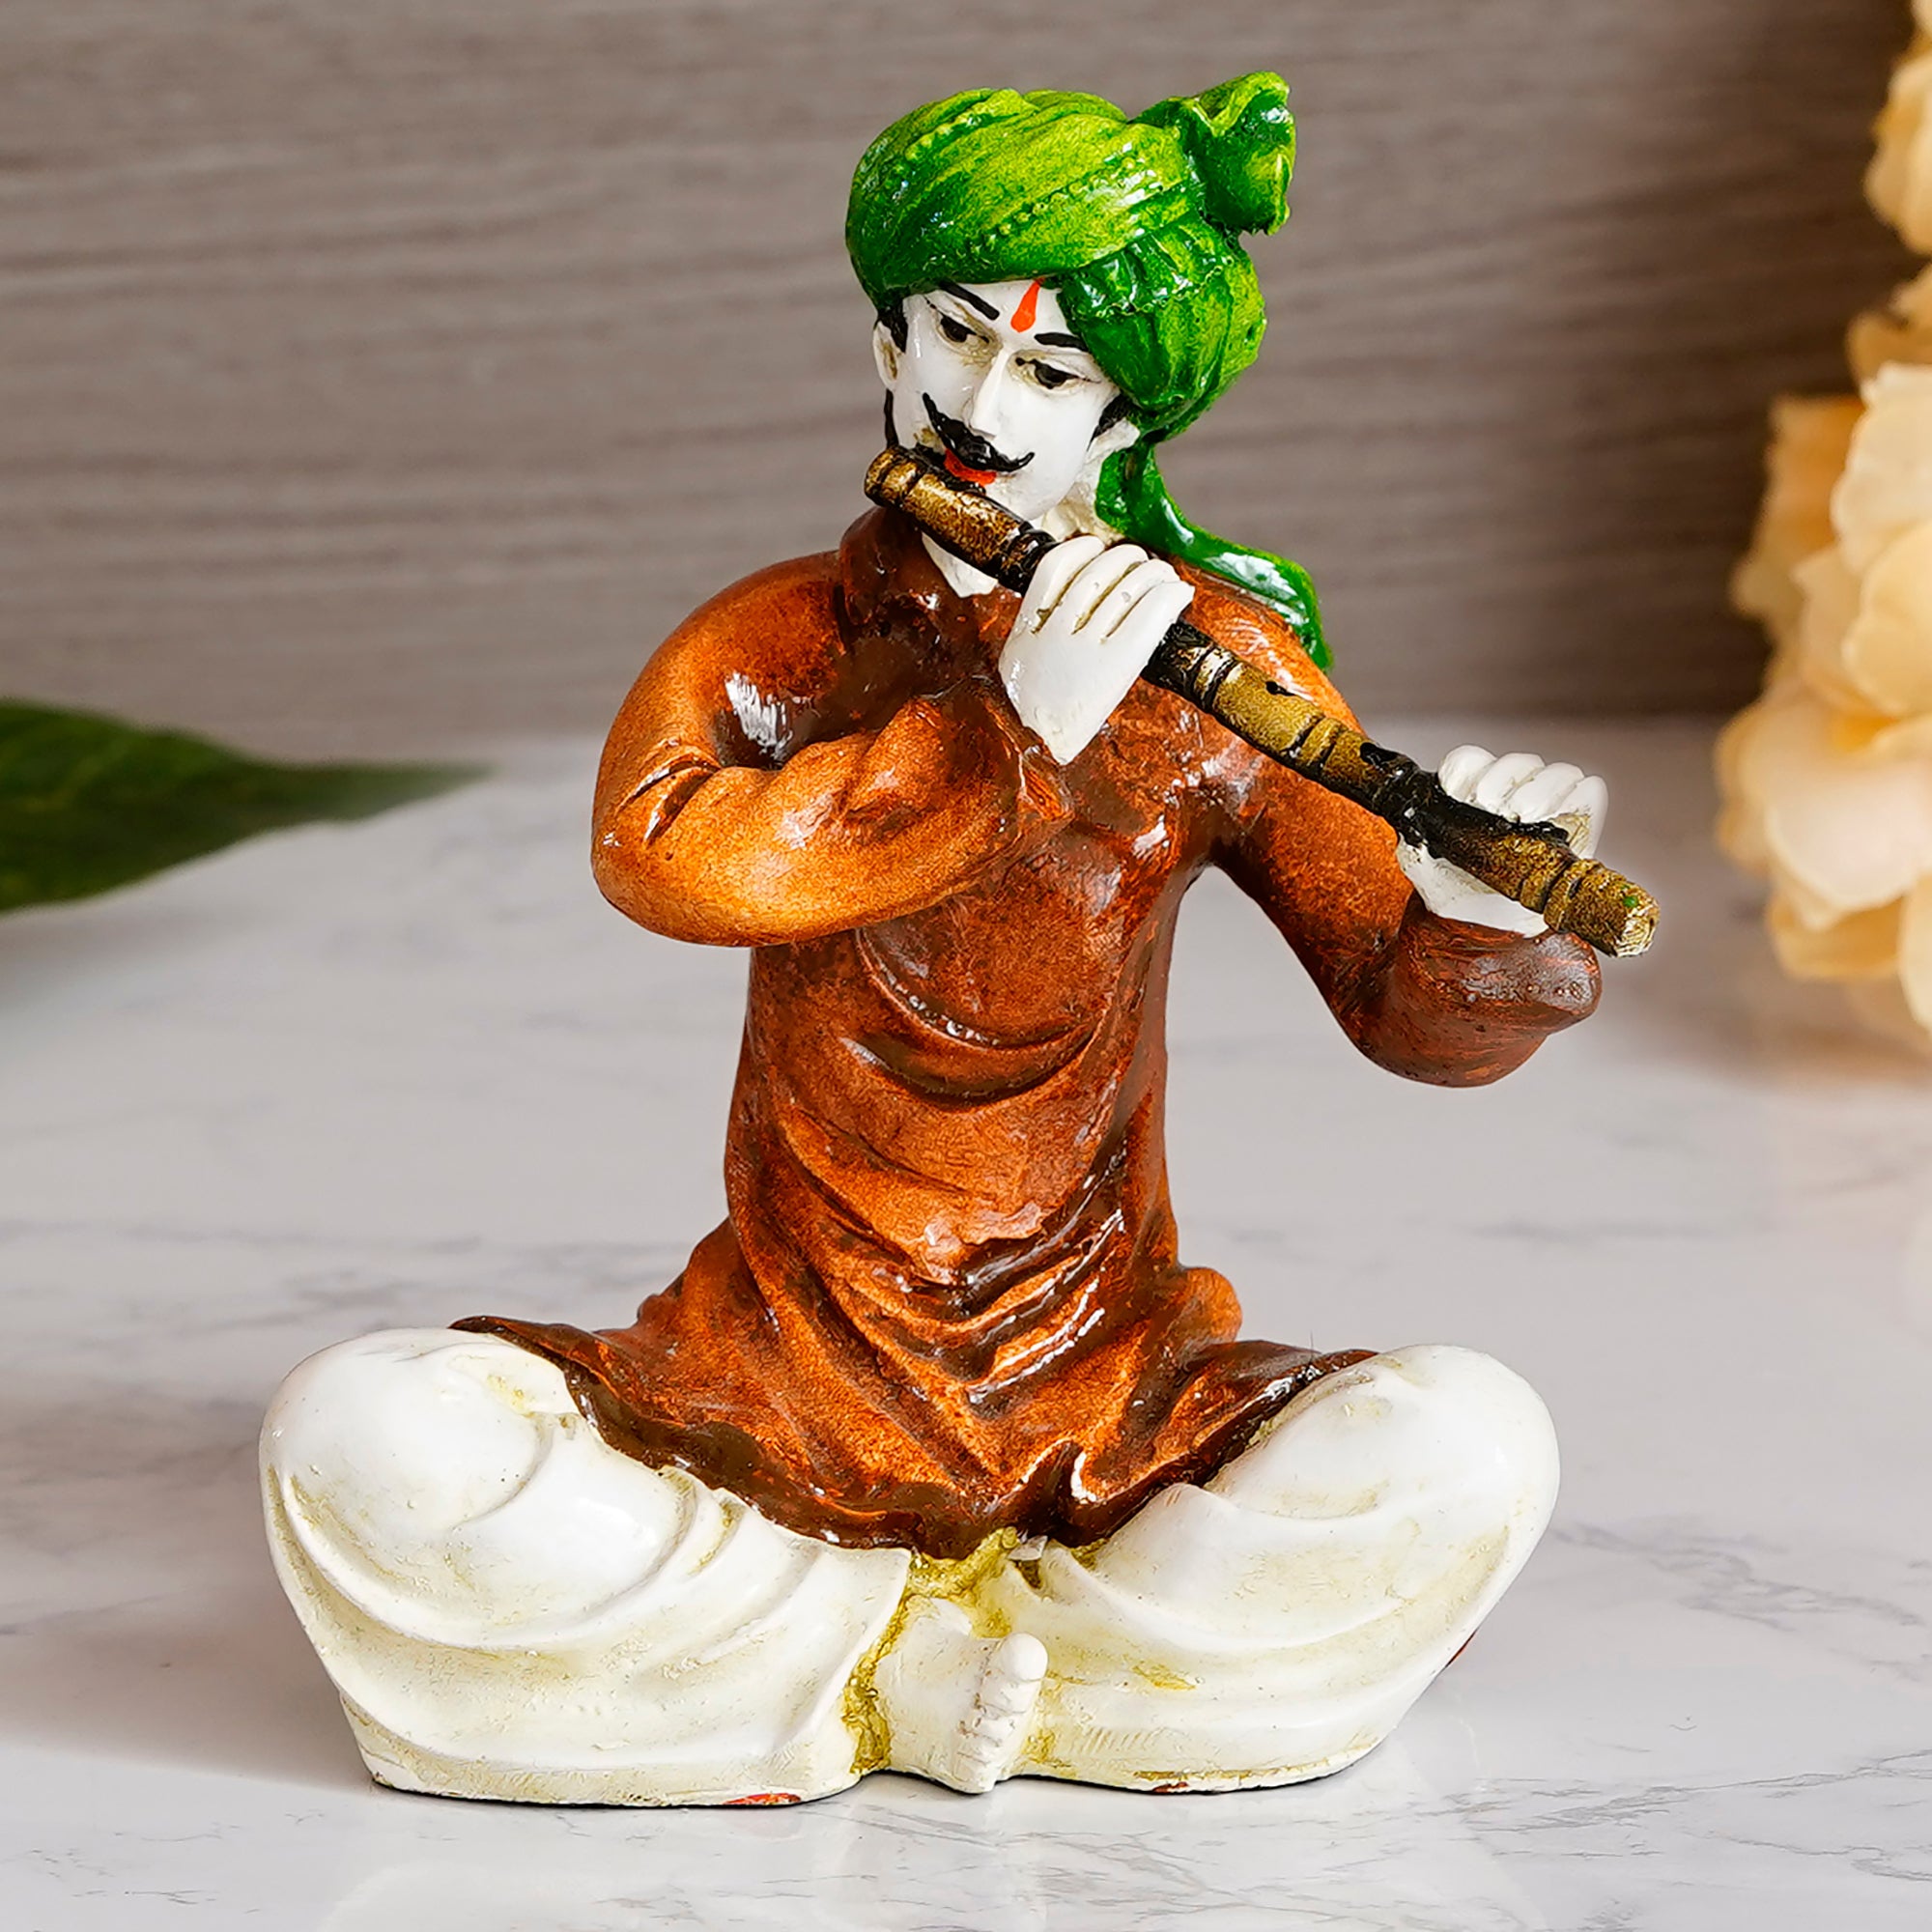 Polyresin Rajasthani Musician Men Statue Playing Flute Human Figurines Home Decor Showpiece 1